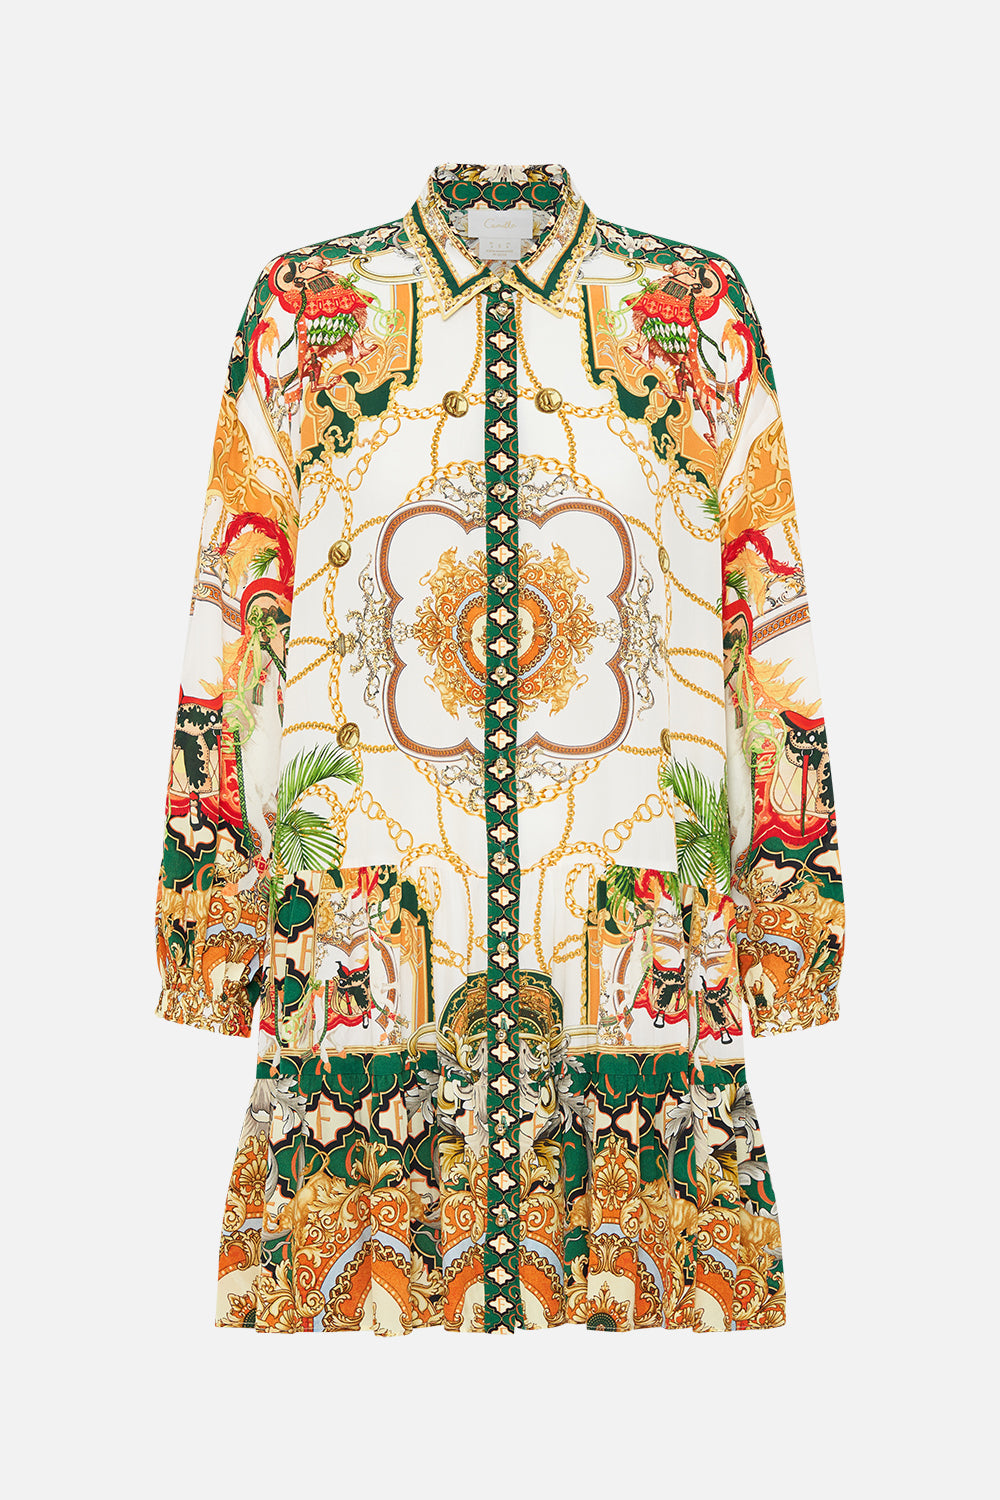 Product view of CAMILLA shirt dress in My Sweet Devotion print